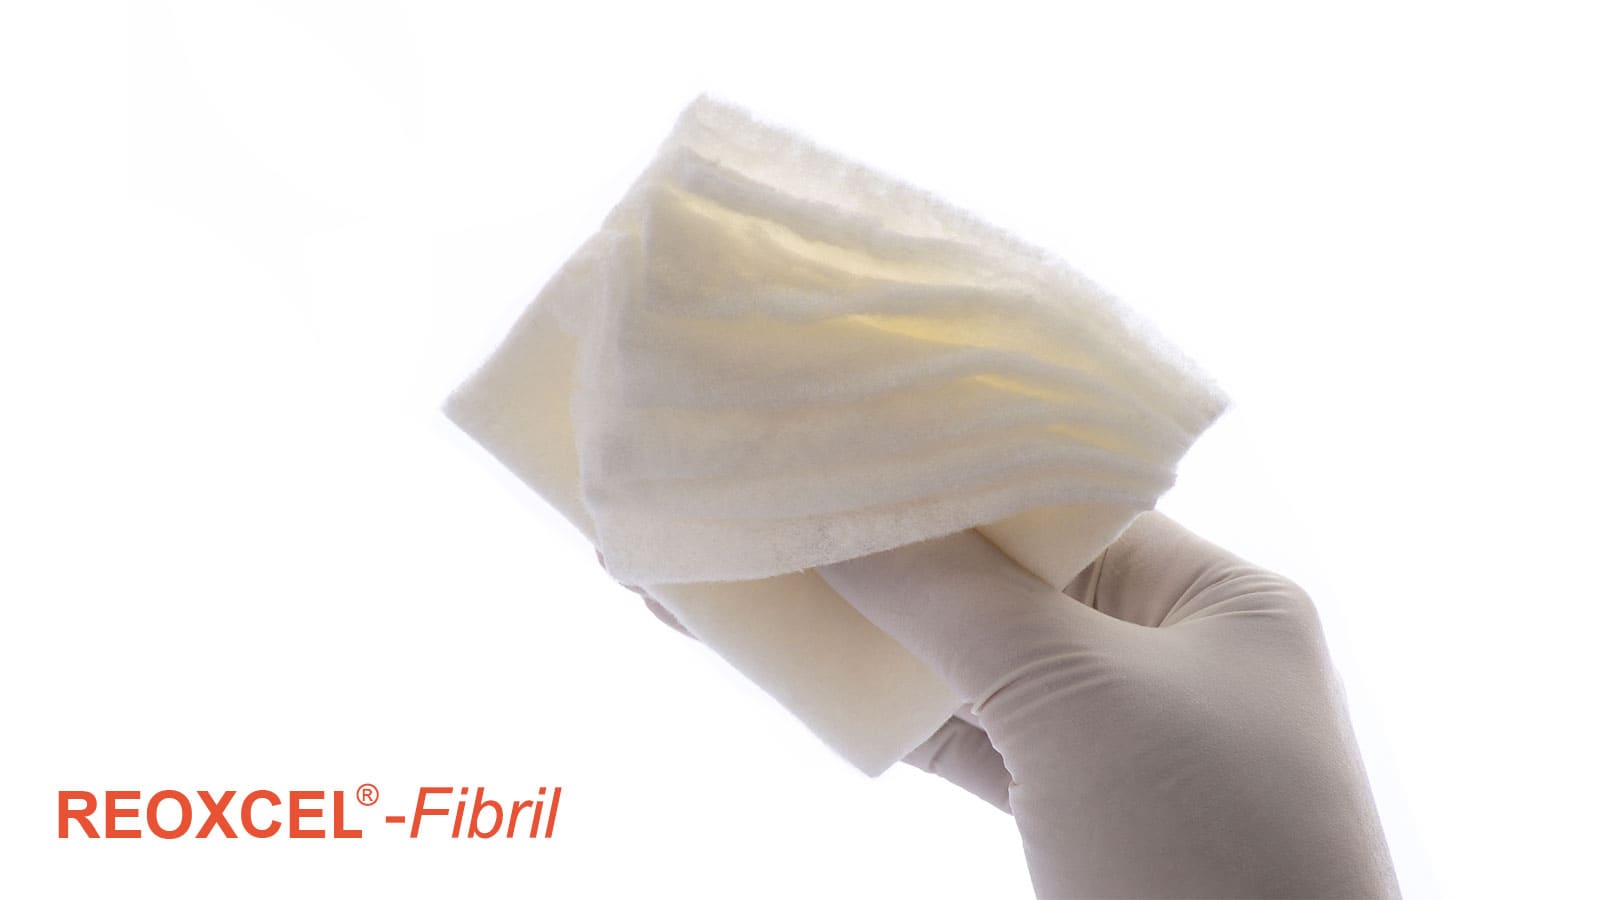 Fibrous and seven layered Reoxcel Fibril haemostat is suitable for using on sensitive tissues and the layers can be separated based on the intensity of bleeding.